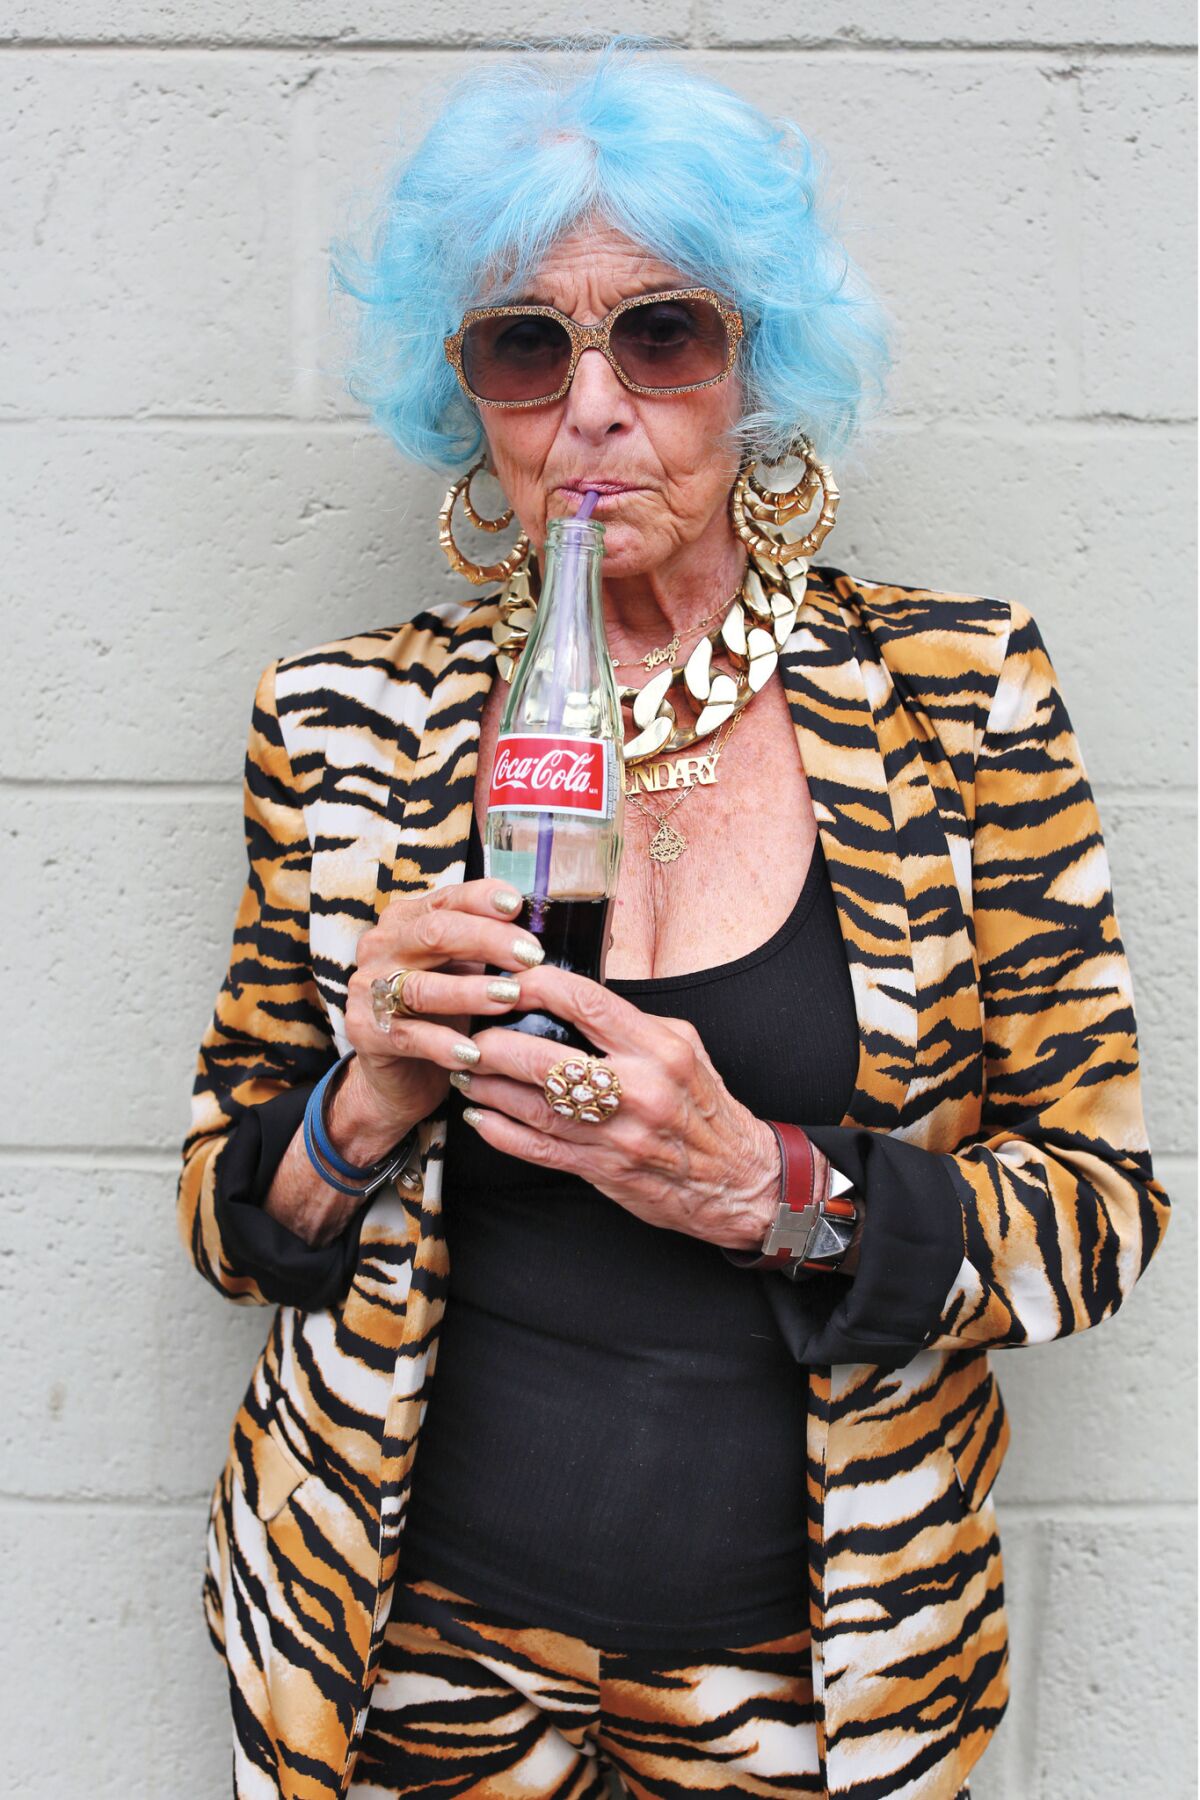 Roberta Haze photographed by Ari Seth Cohen for Cohen's new book, "Advanced Style: Older and Wiser." (Ari Seth Cohen / powerHouse Books)